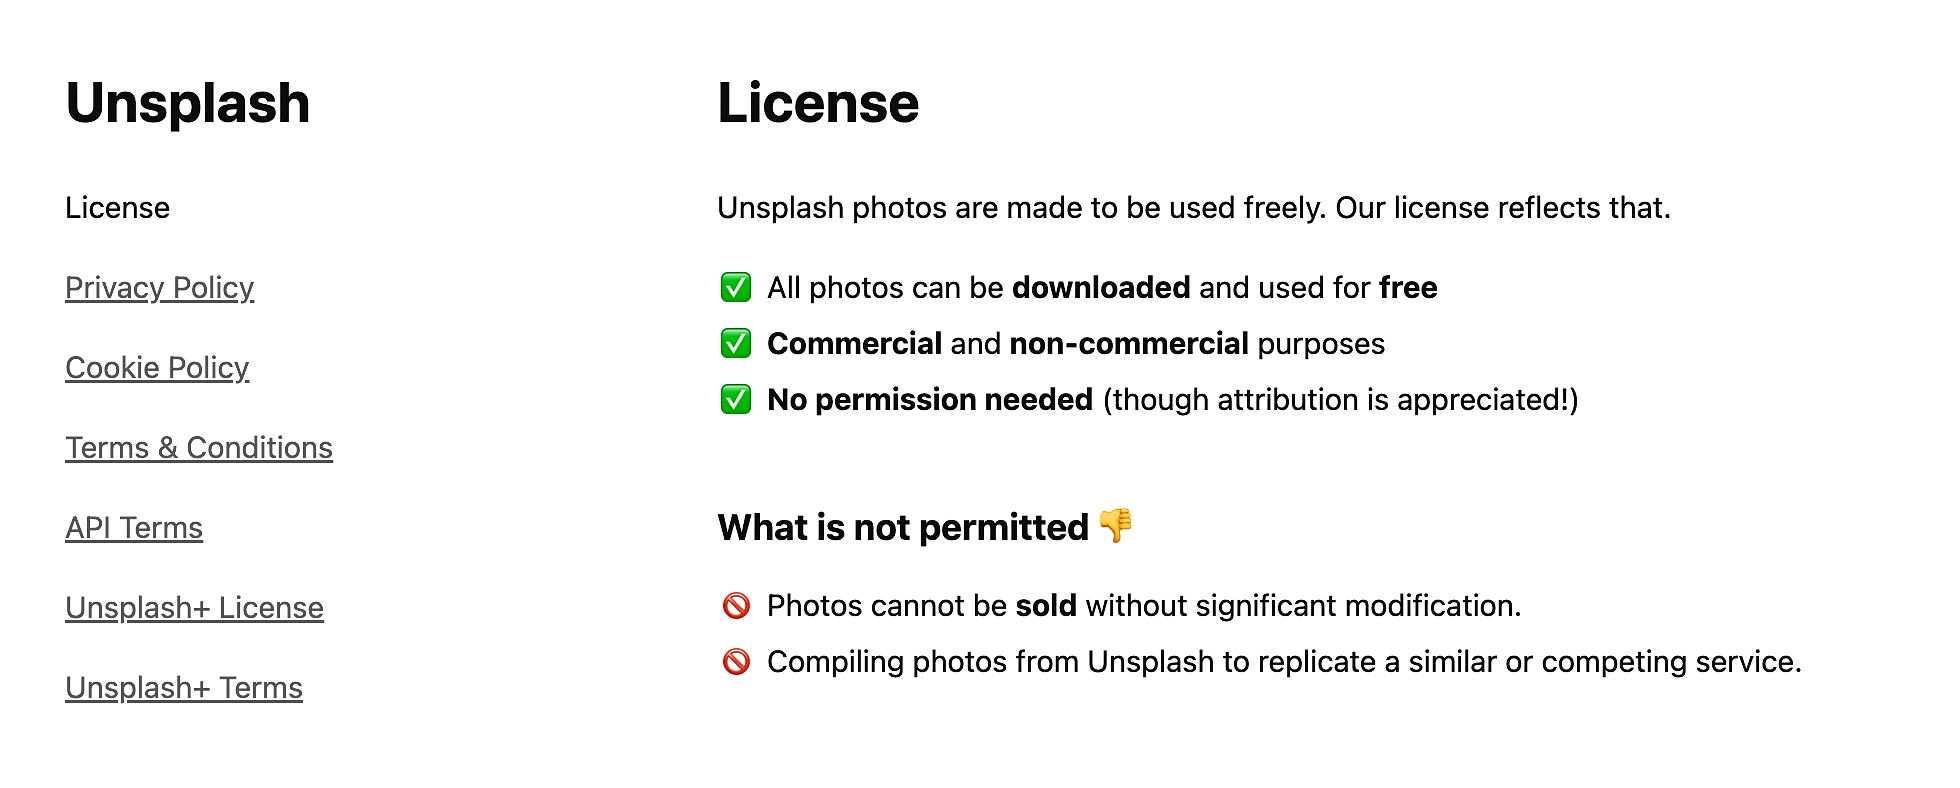 The Unsplash license page lays out their website legal requirements in a straightforward manner.